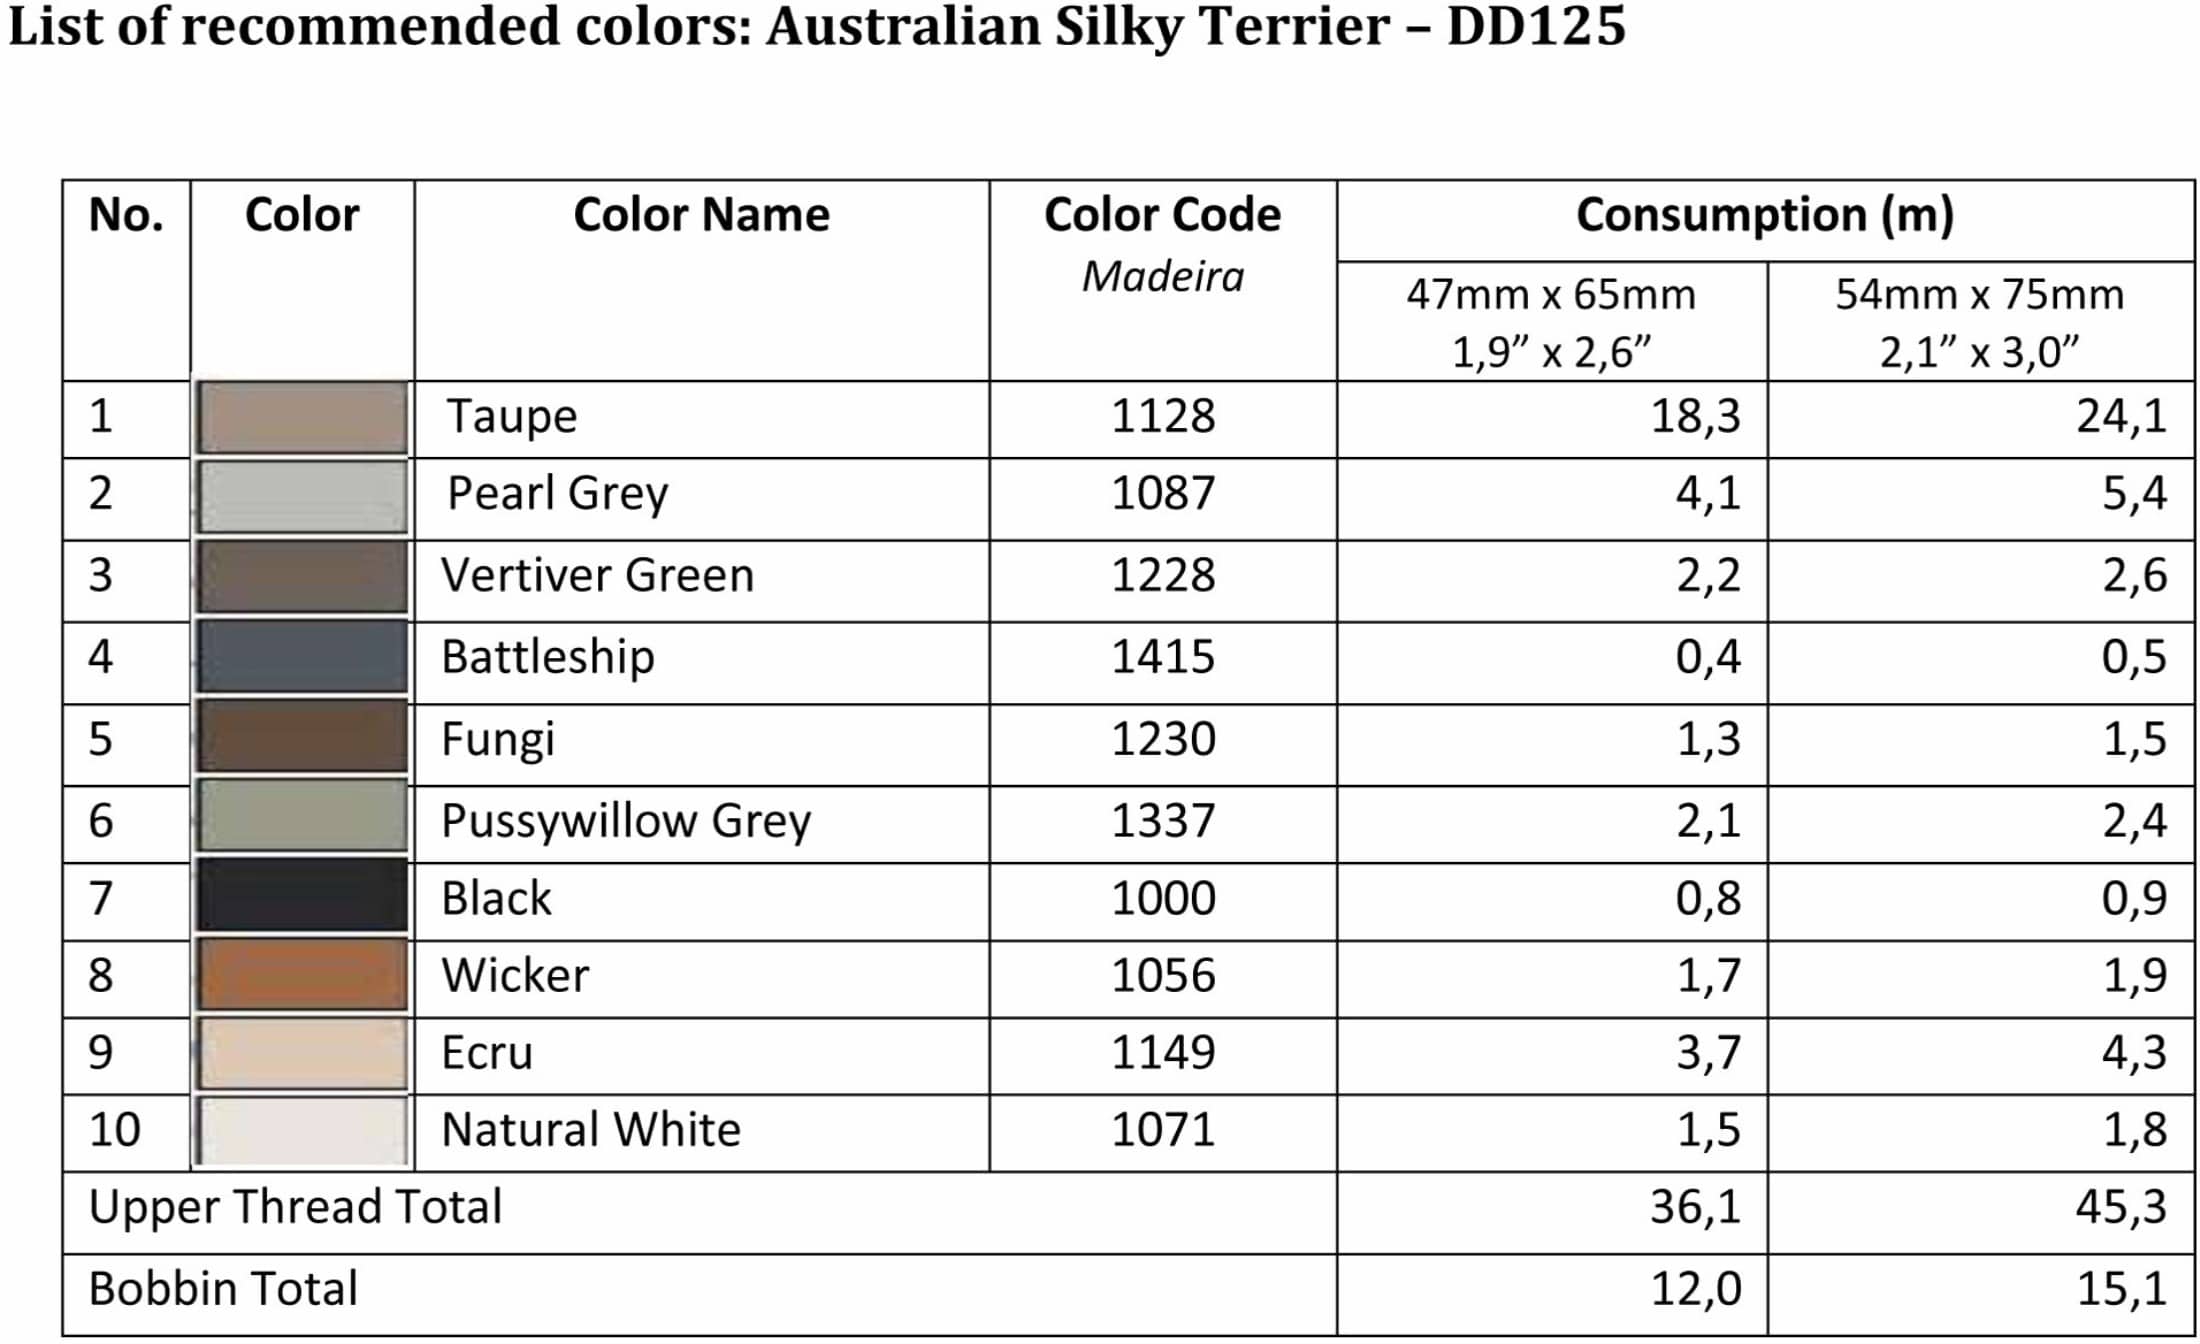 List of Recommended Colors - Australian Silky Terrier DD125